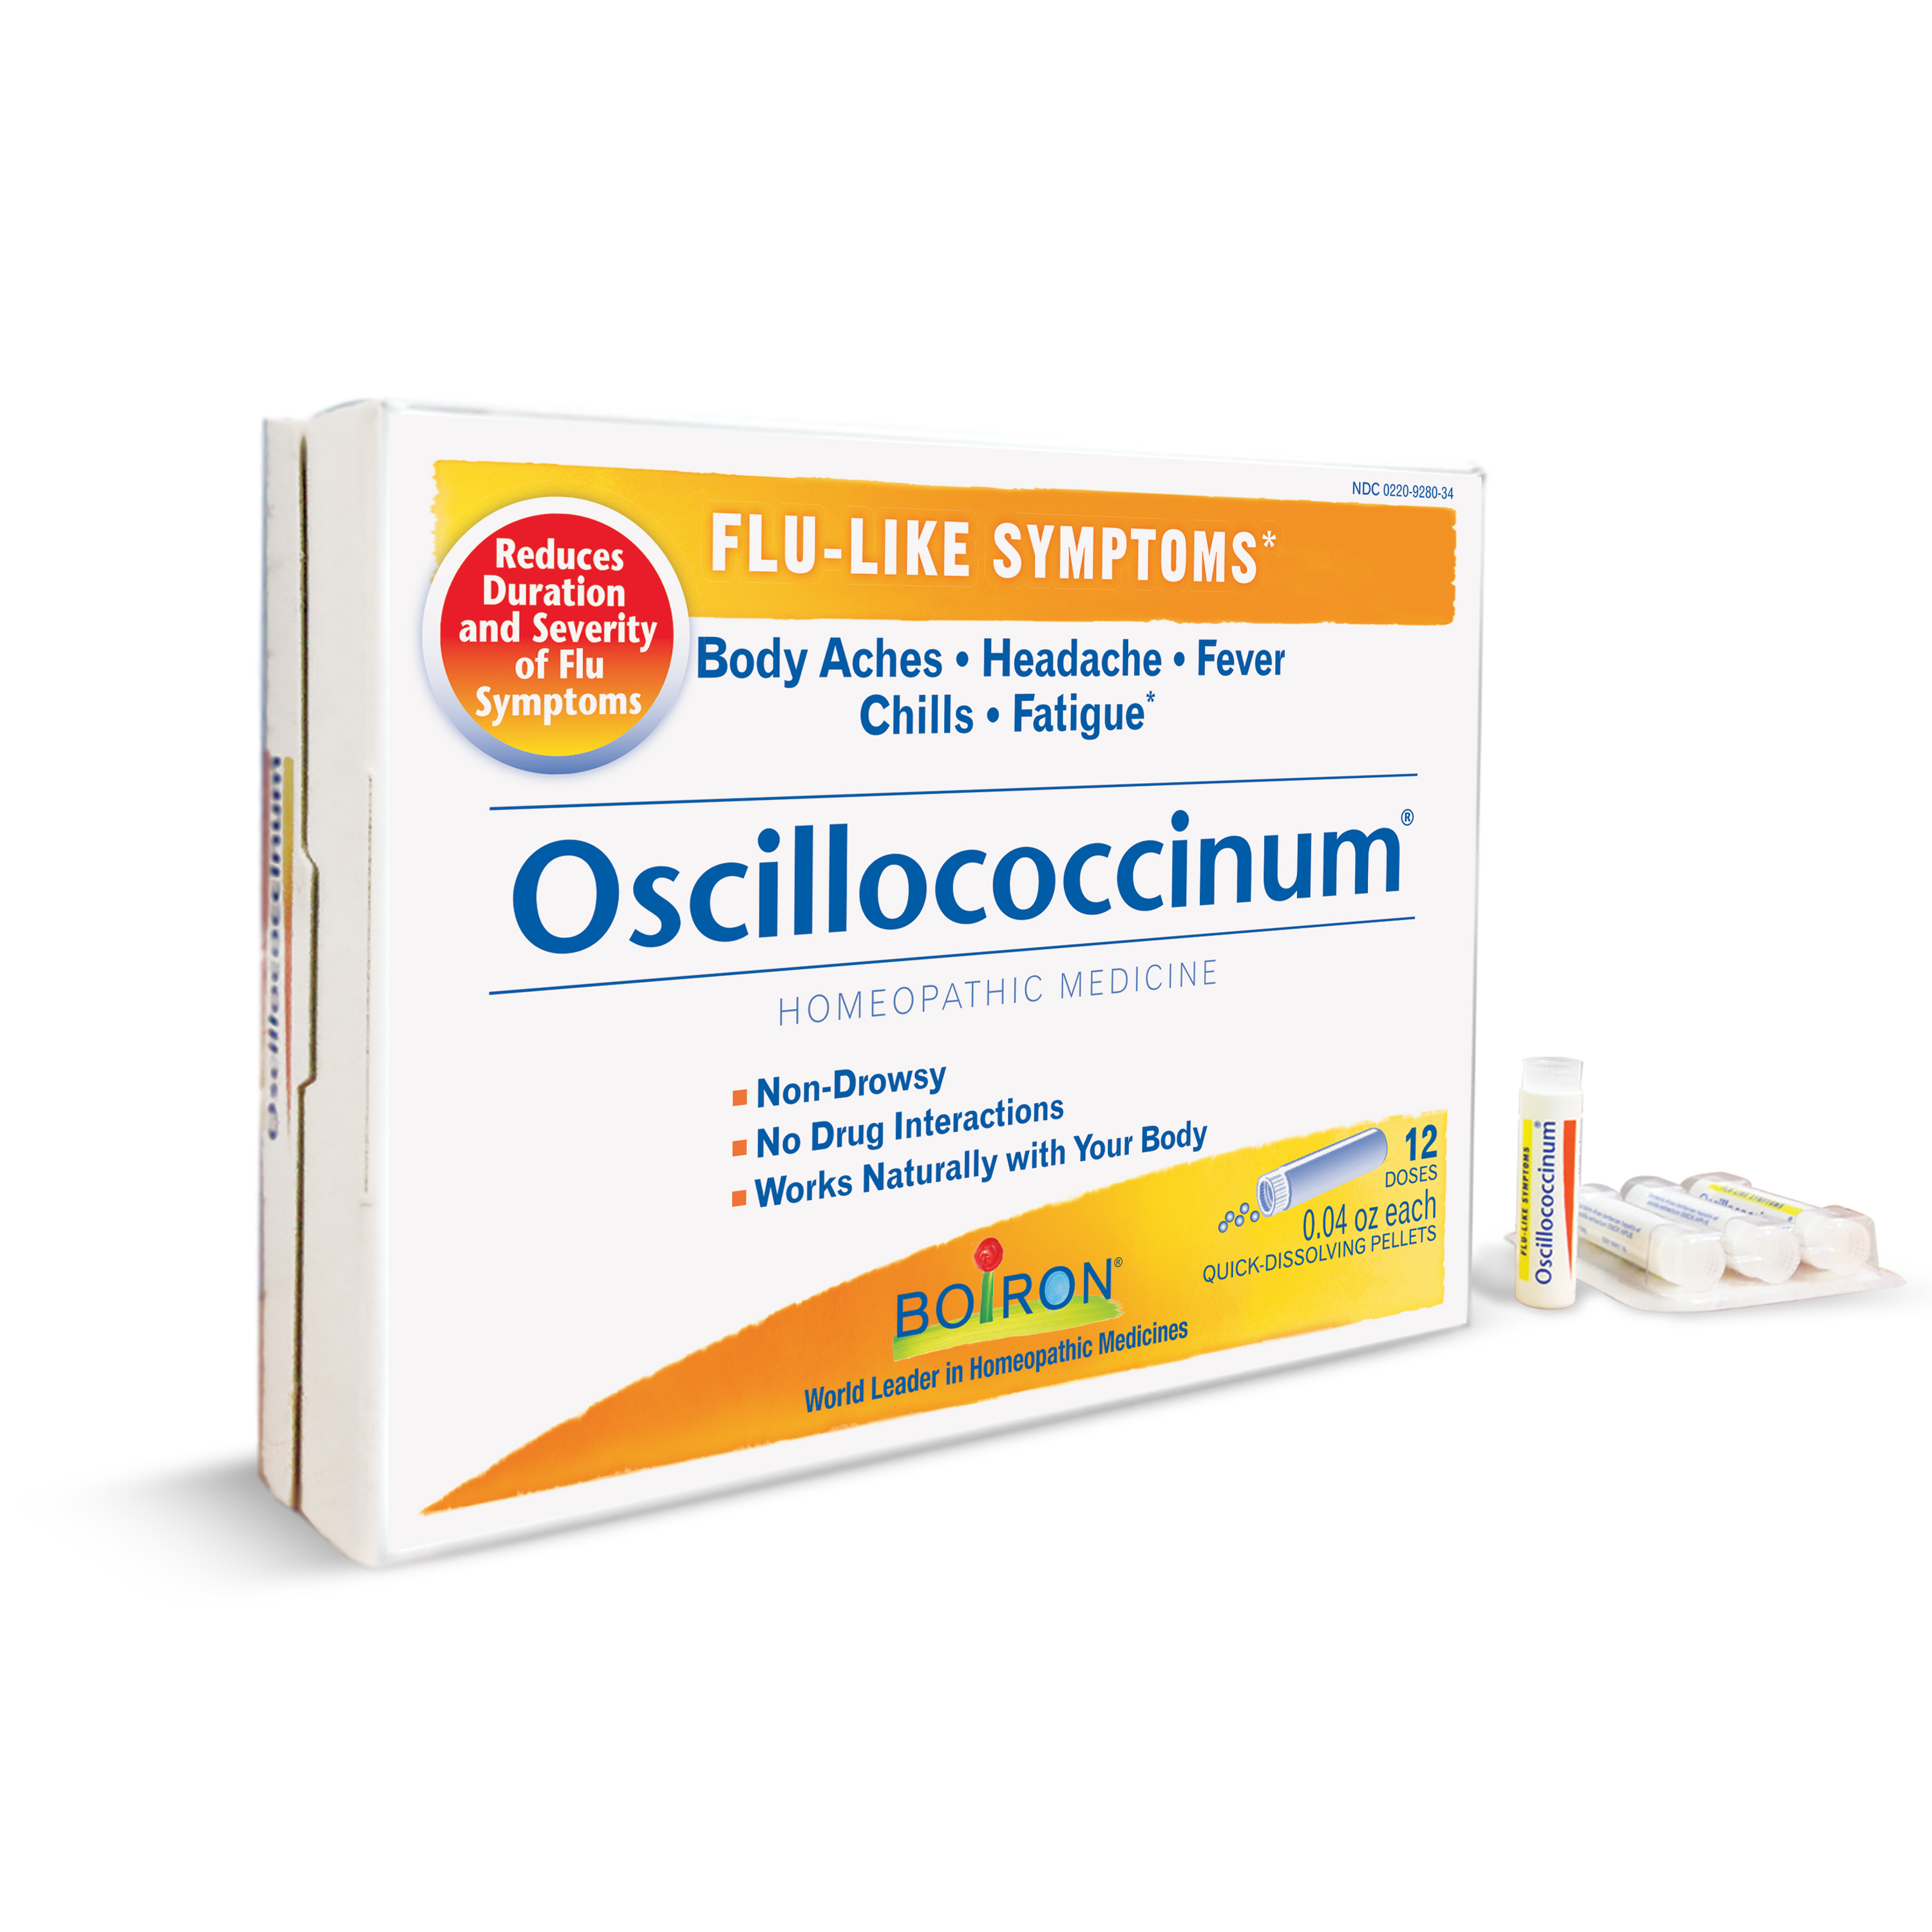 Boiron Oscillococcinum Homeopathic Medicine for Flu-like Symptoms, 12 Count - image 3 of 9